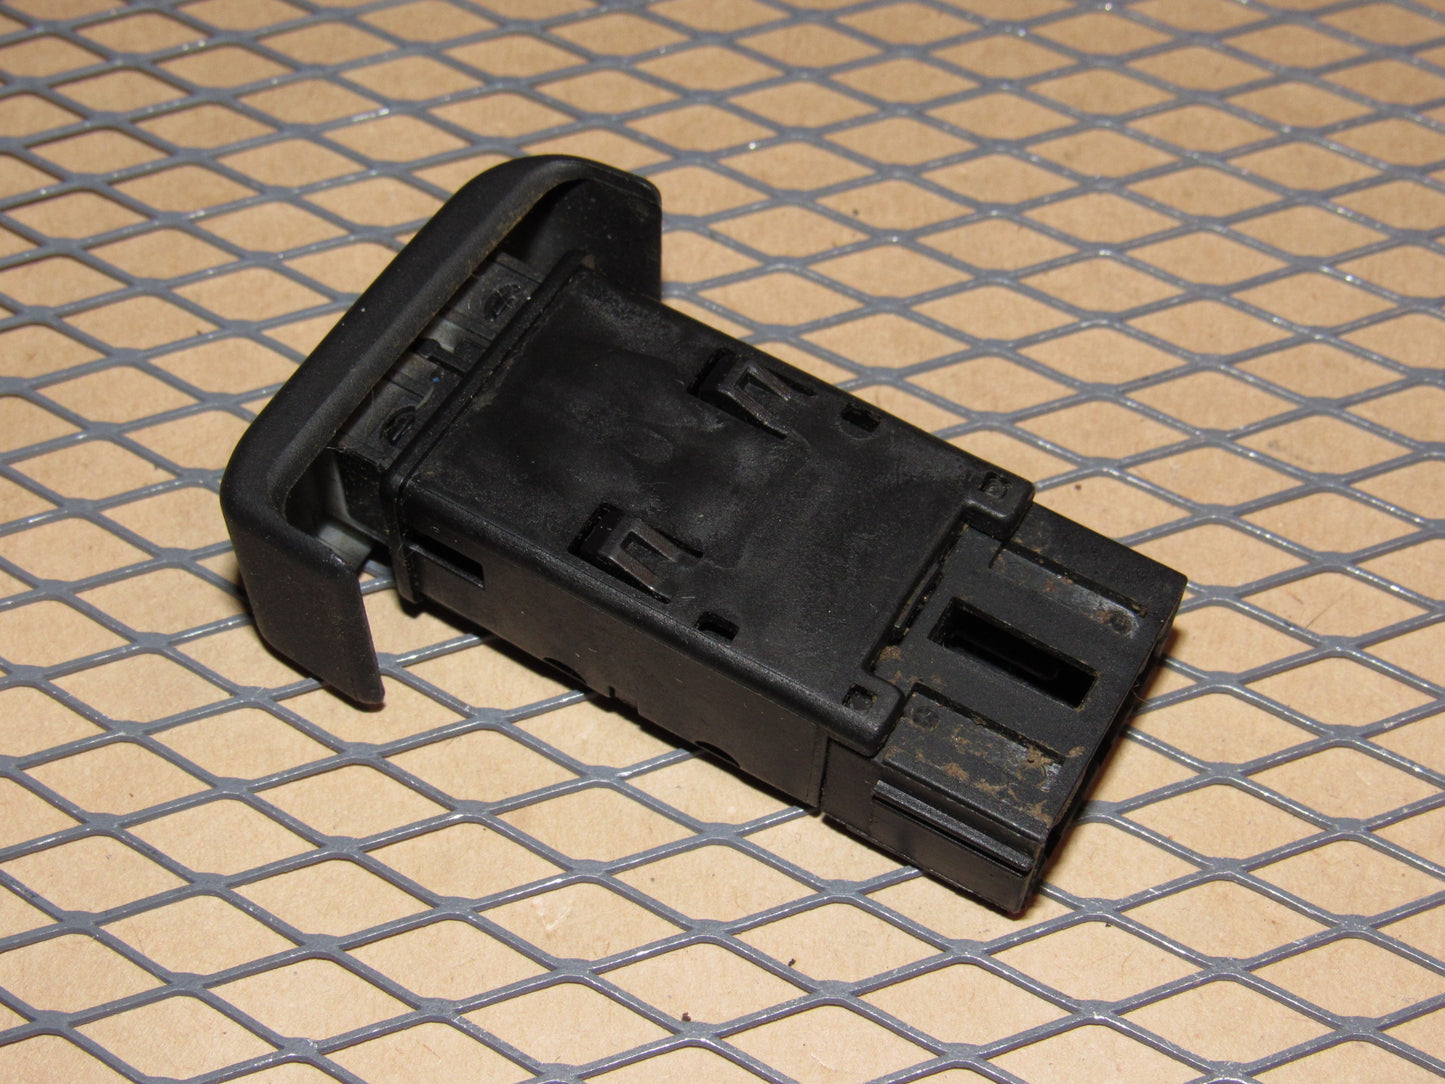 03 04 Land Rover Discovery OEM Rear Wiper Switch